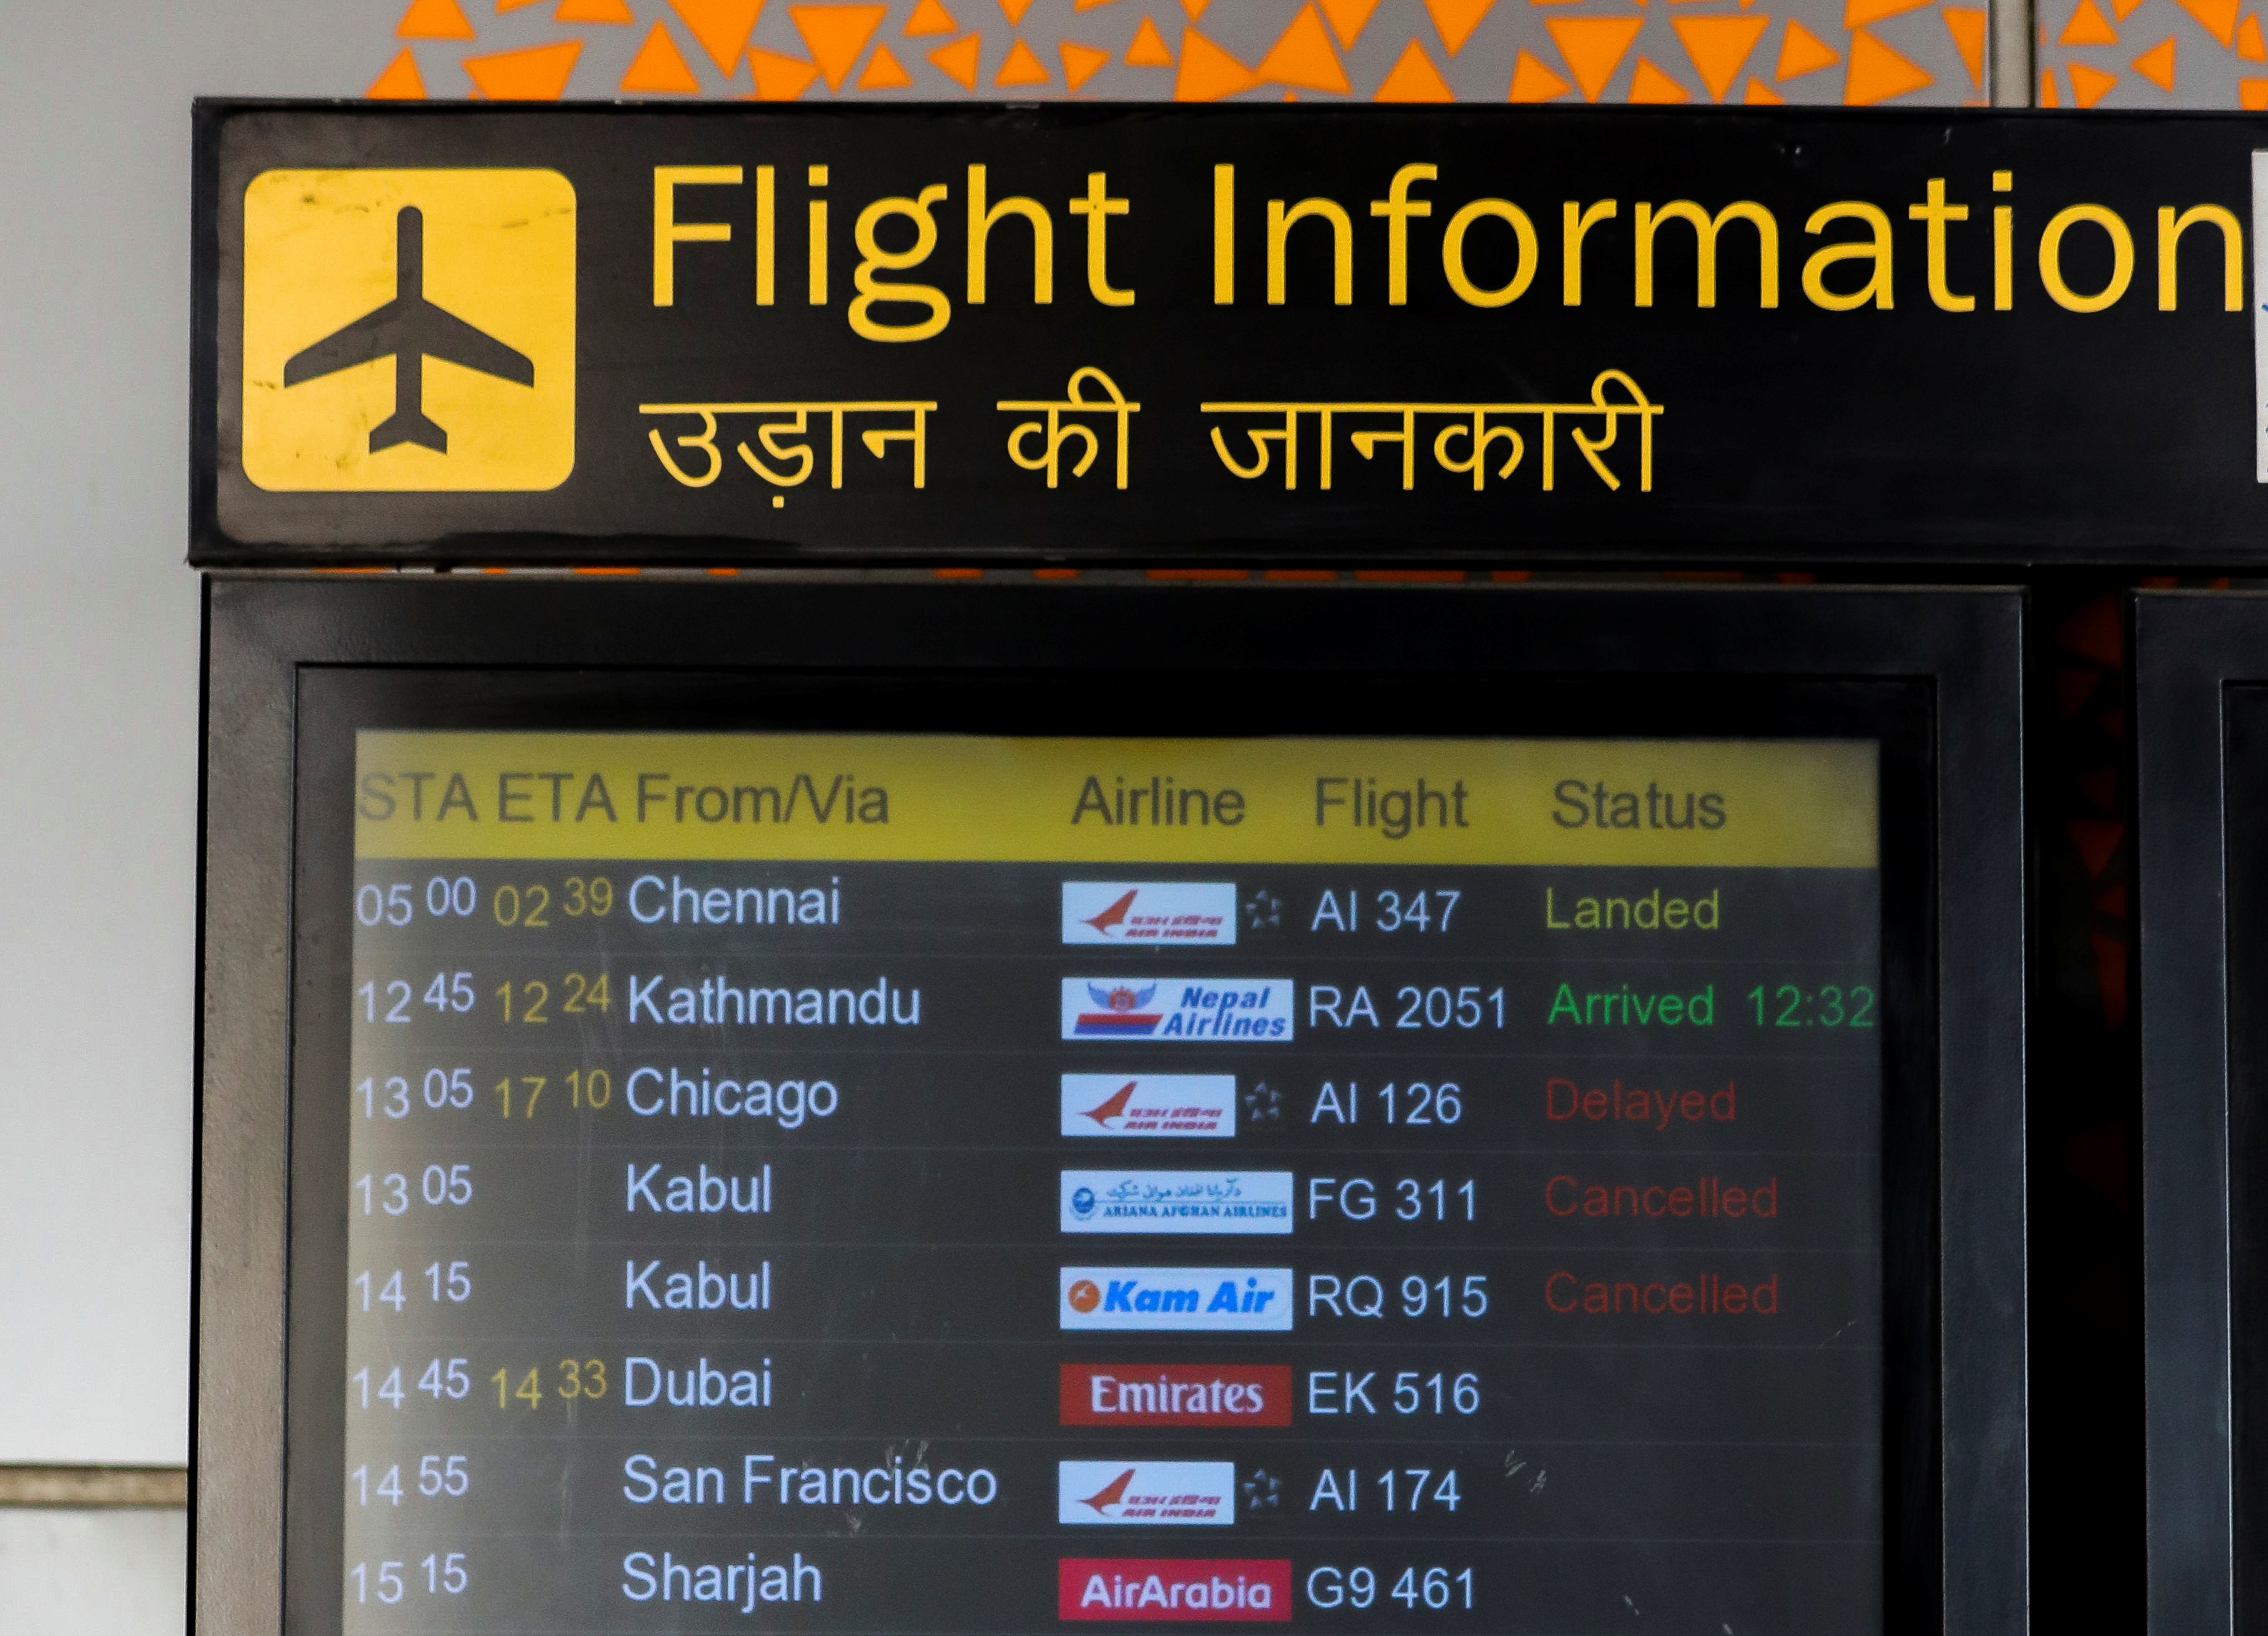 A flight Information board showing flights cancelled from Kabul is pictured at the Indira Gandhi International Airport in New Delhi, India August 16, 2021. REUTERS/Anushree Fadnavis